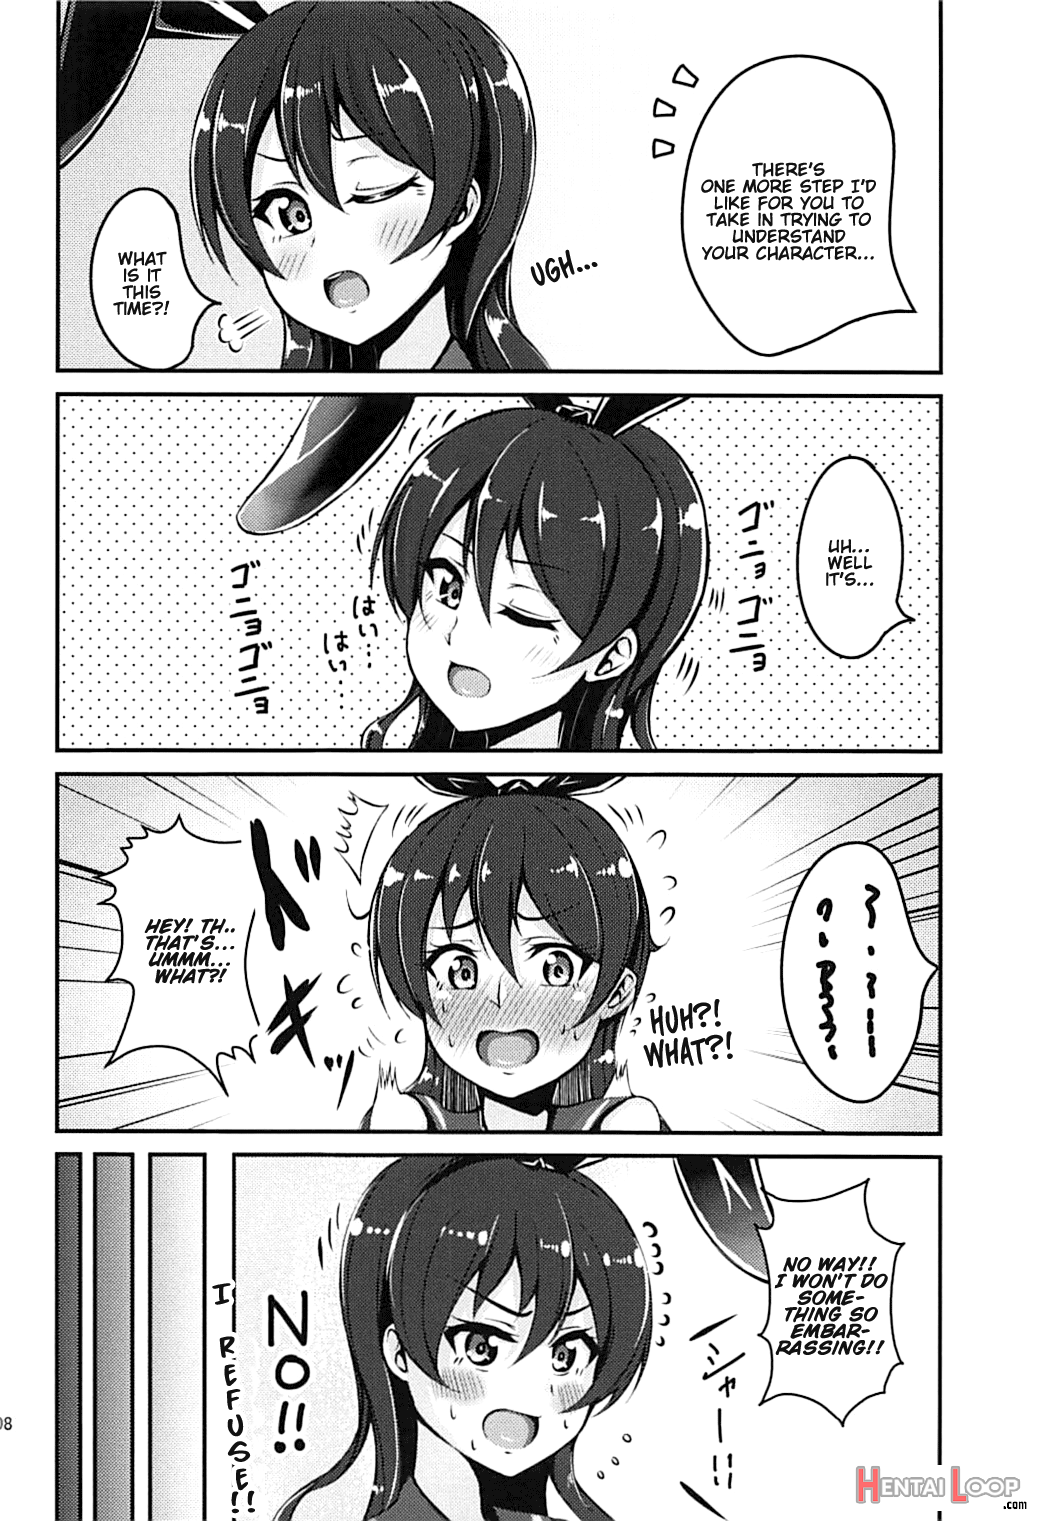 Race To The Finish With Umi-chan!! page 7